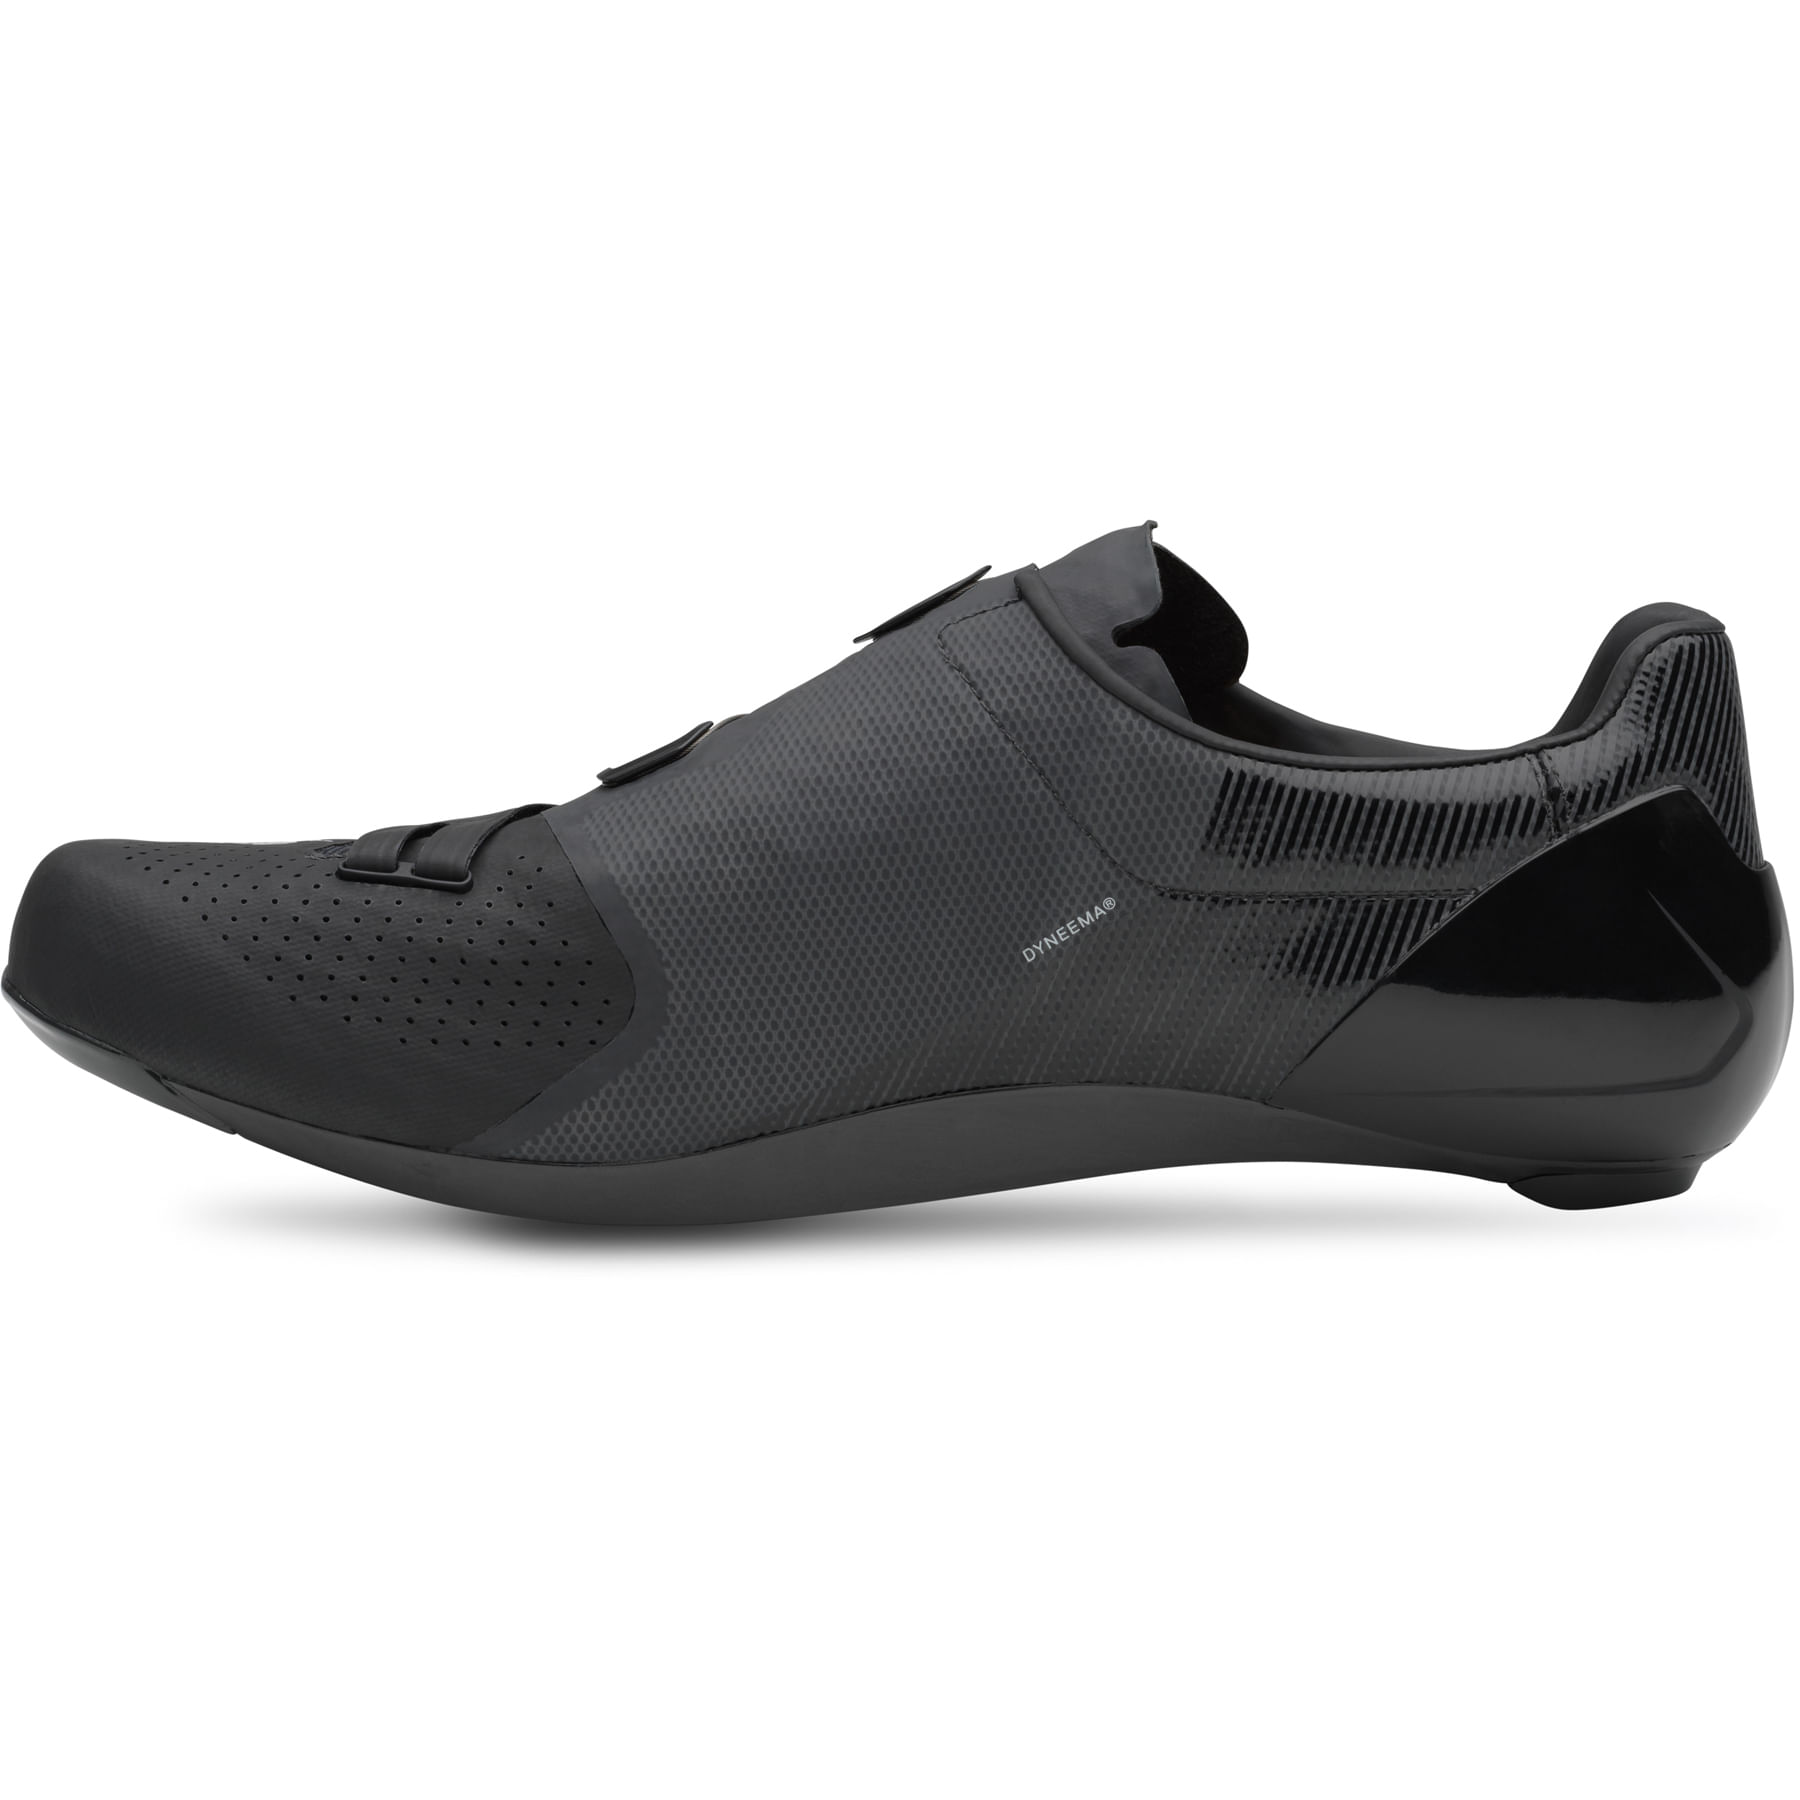 S-Works 7 ROAD SHOE | Cycling Shoes